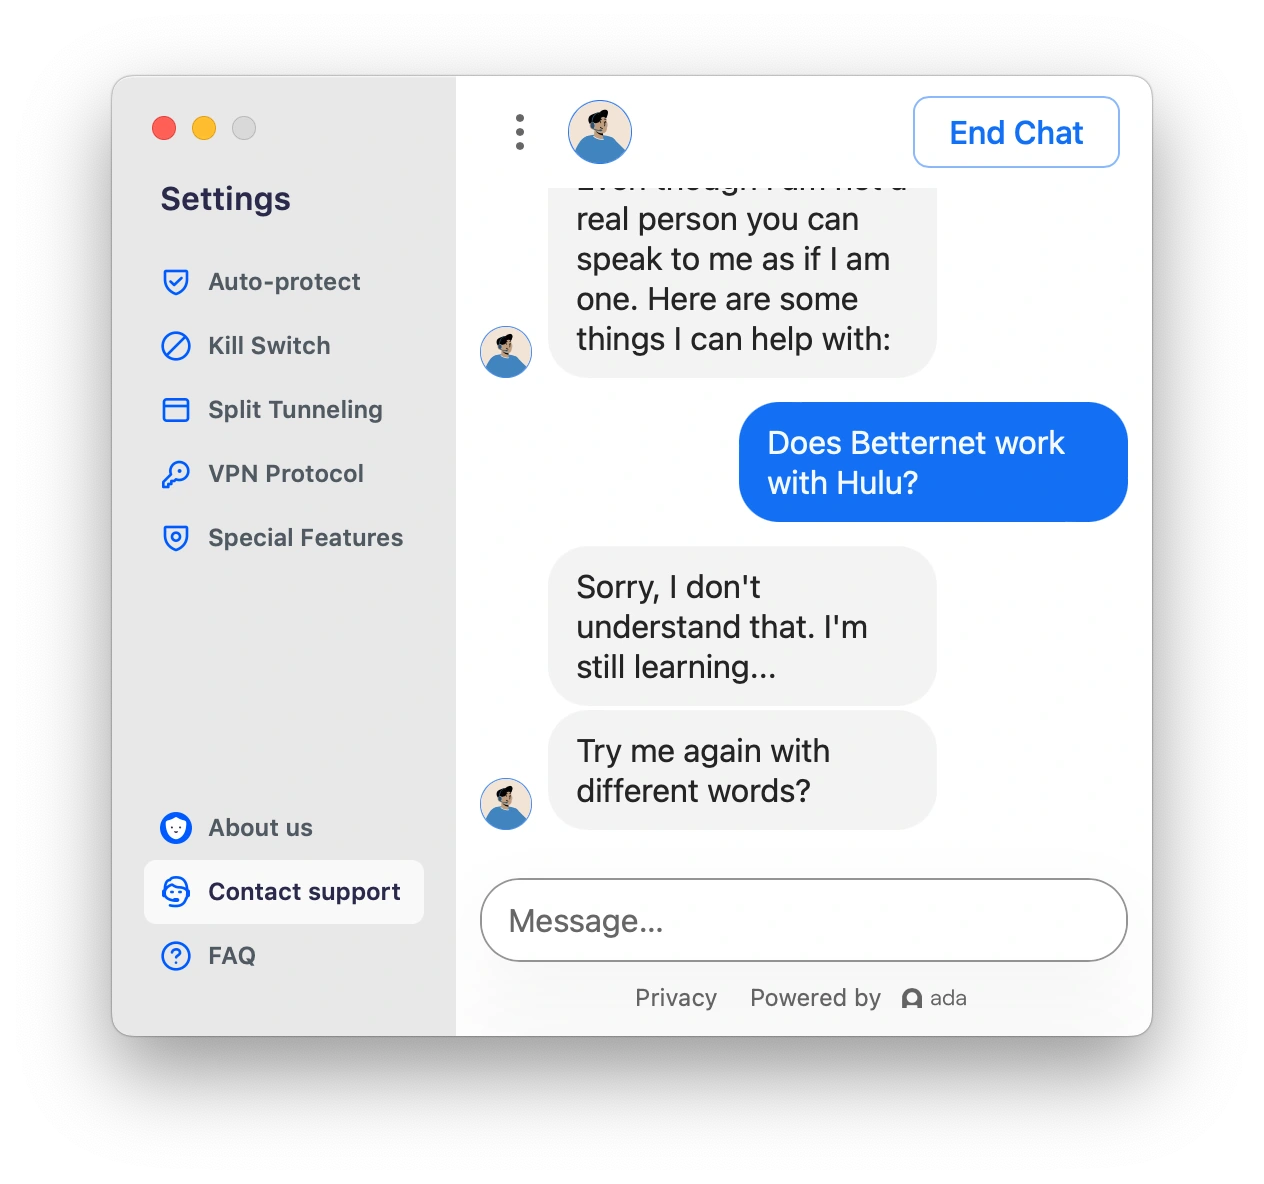 Betternet's automated Chatbot